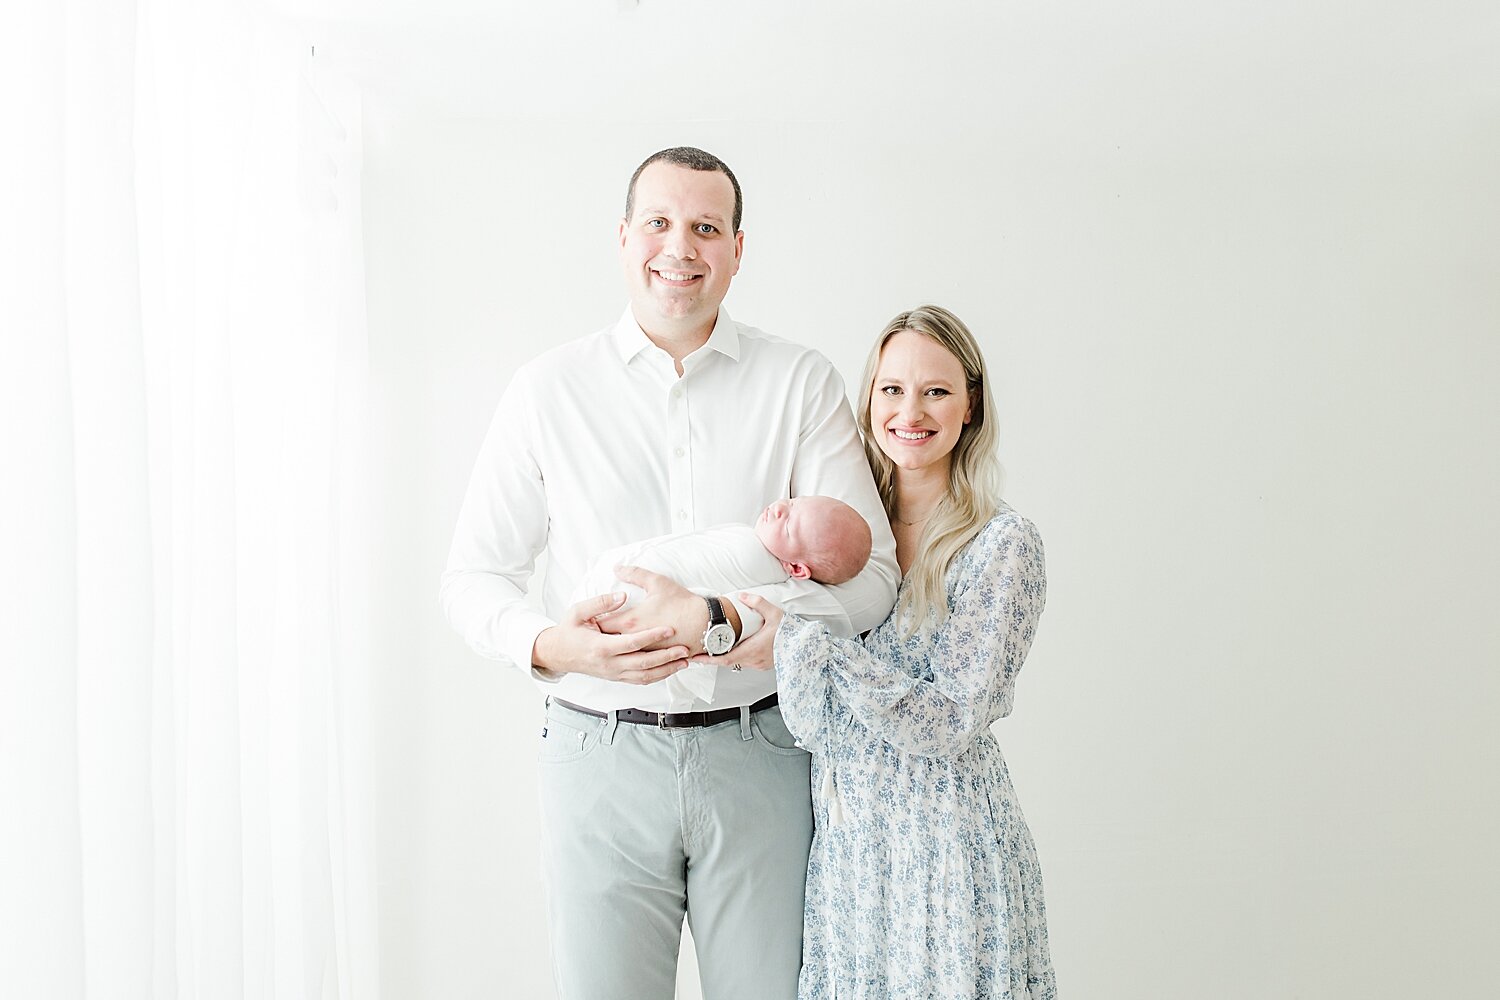 NYC Family comes to Darien, CT Newborn Studio for photos with Kristin Wood Photography.